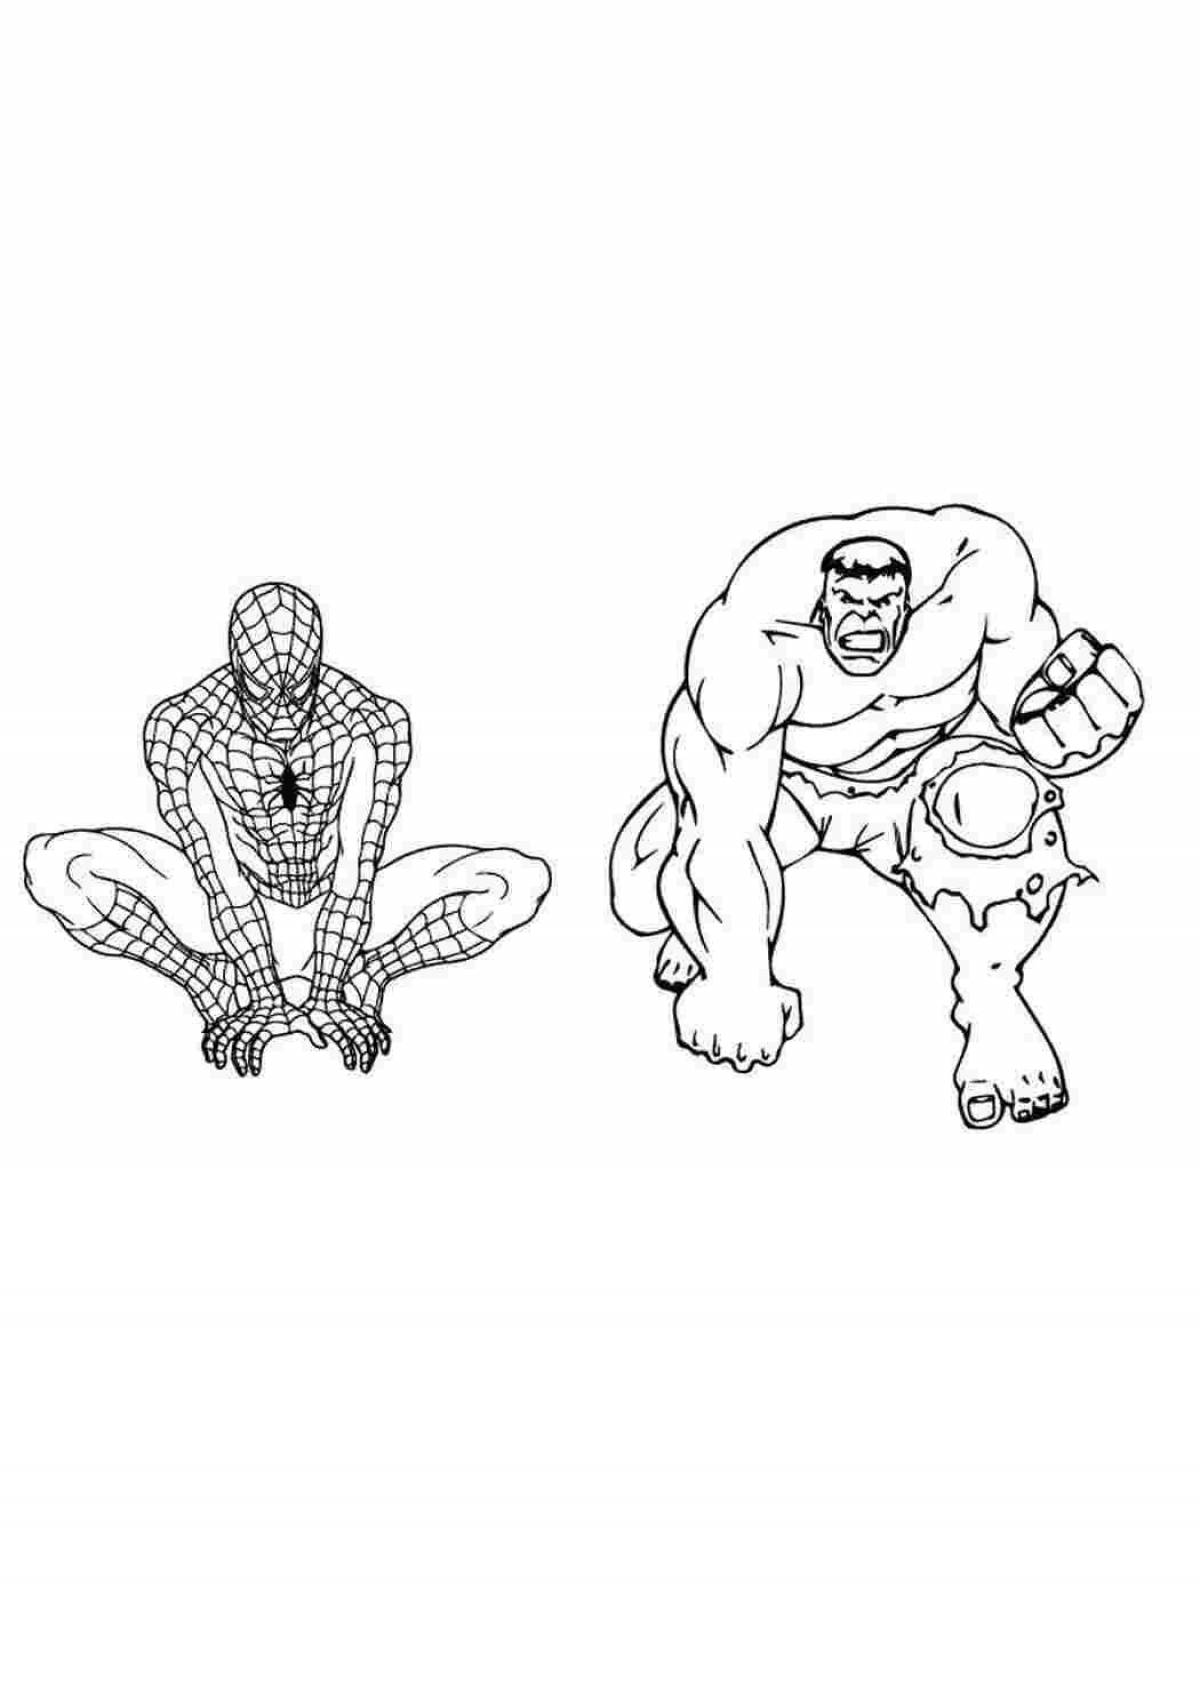 Intriguing coloring book Spiderman with Hulk